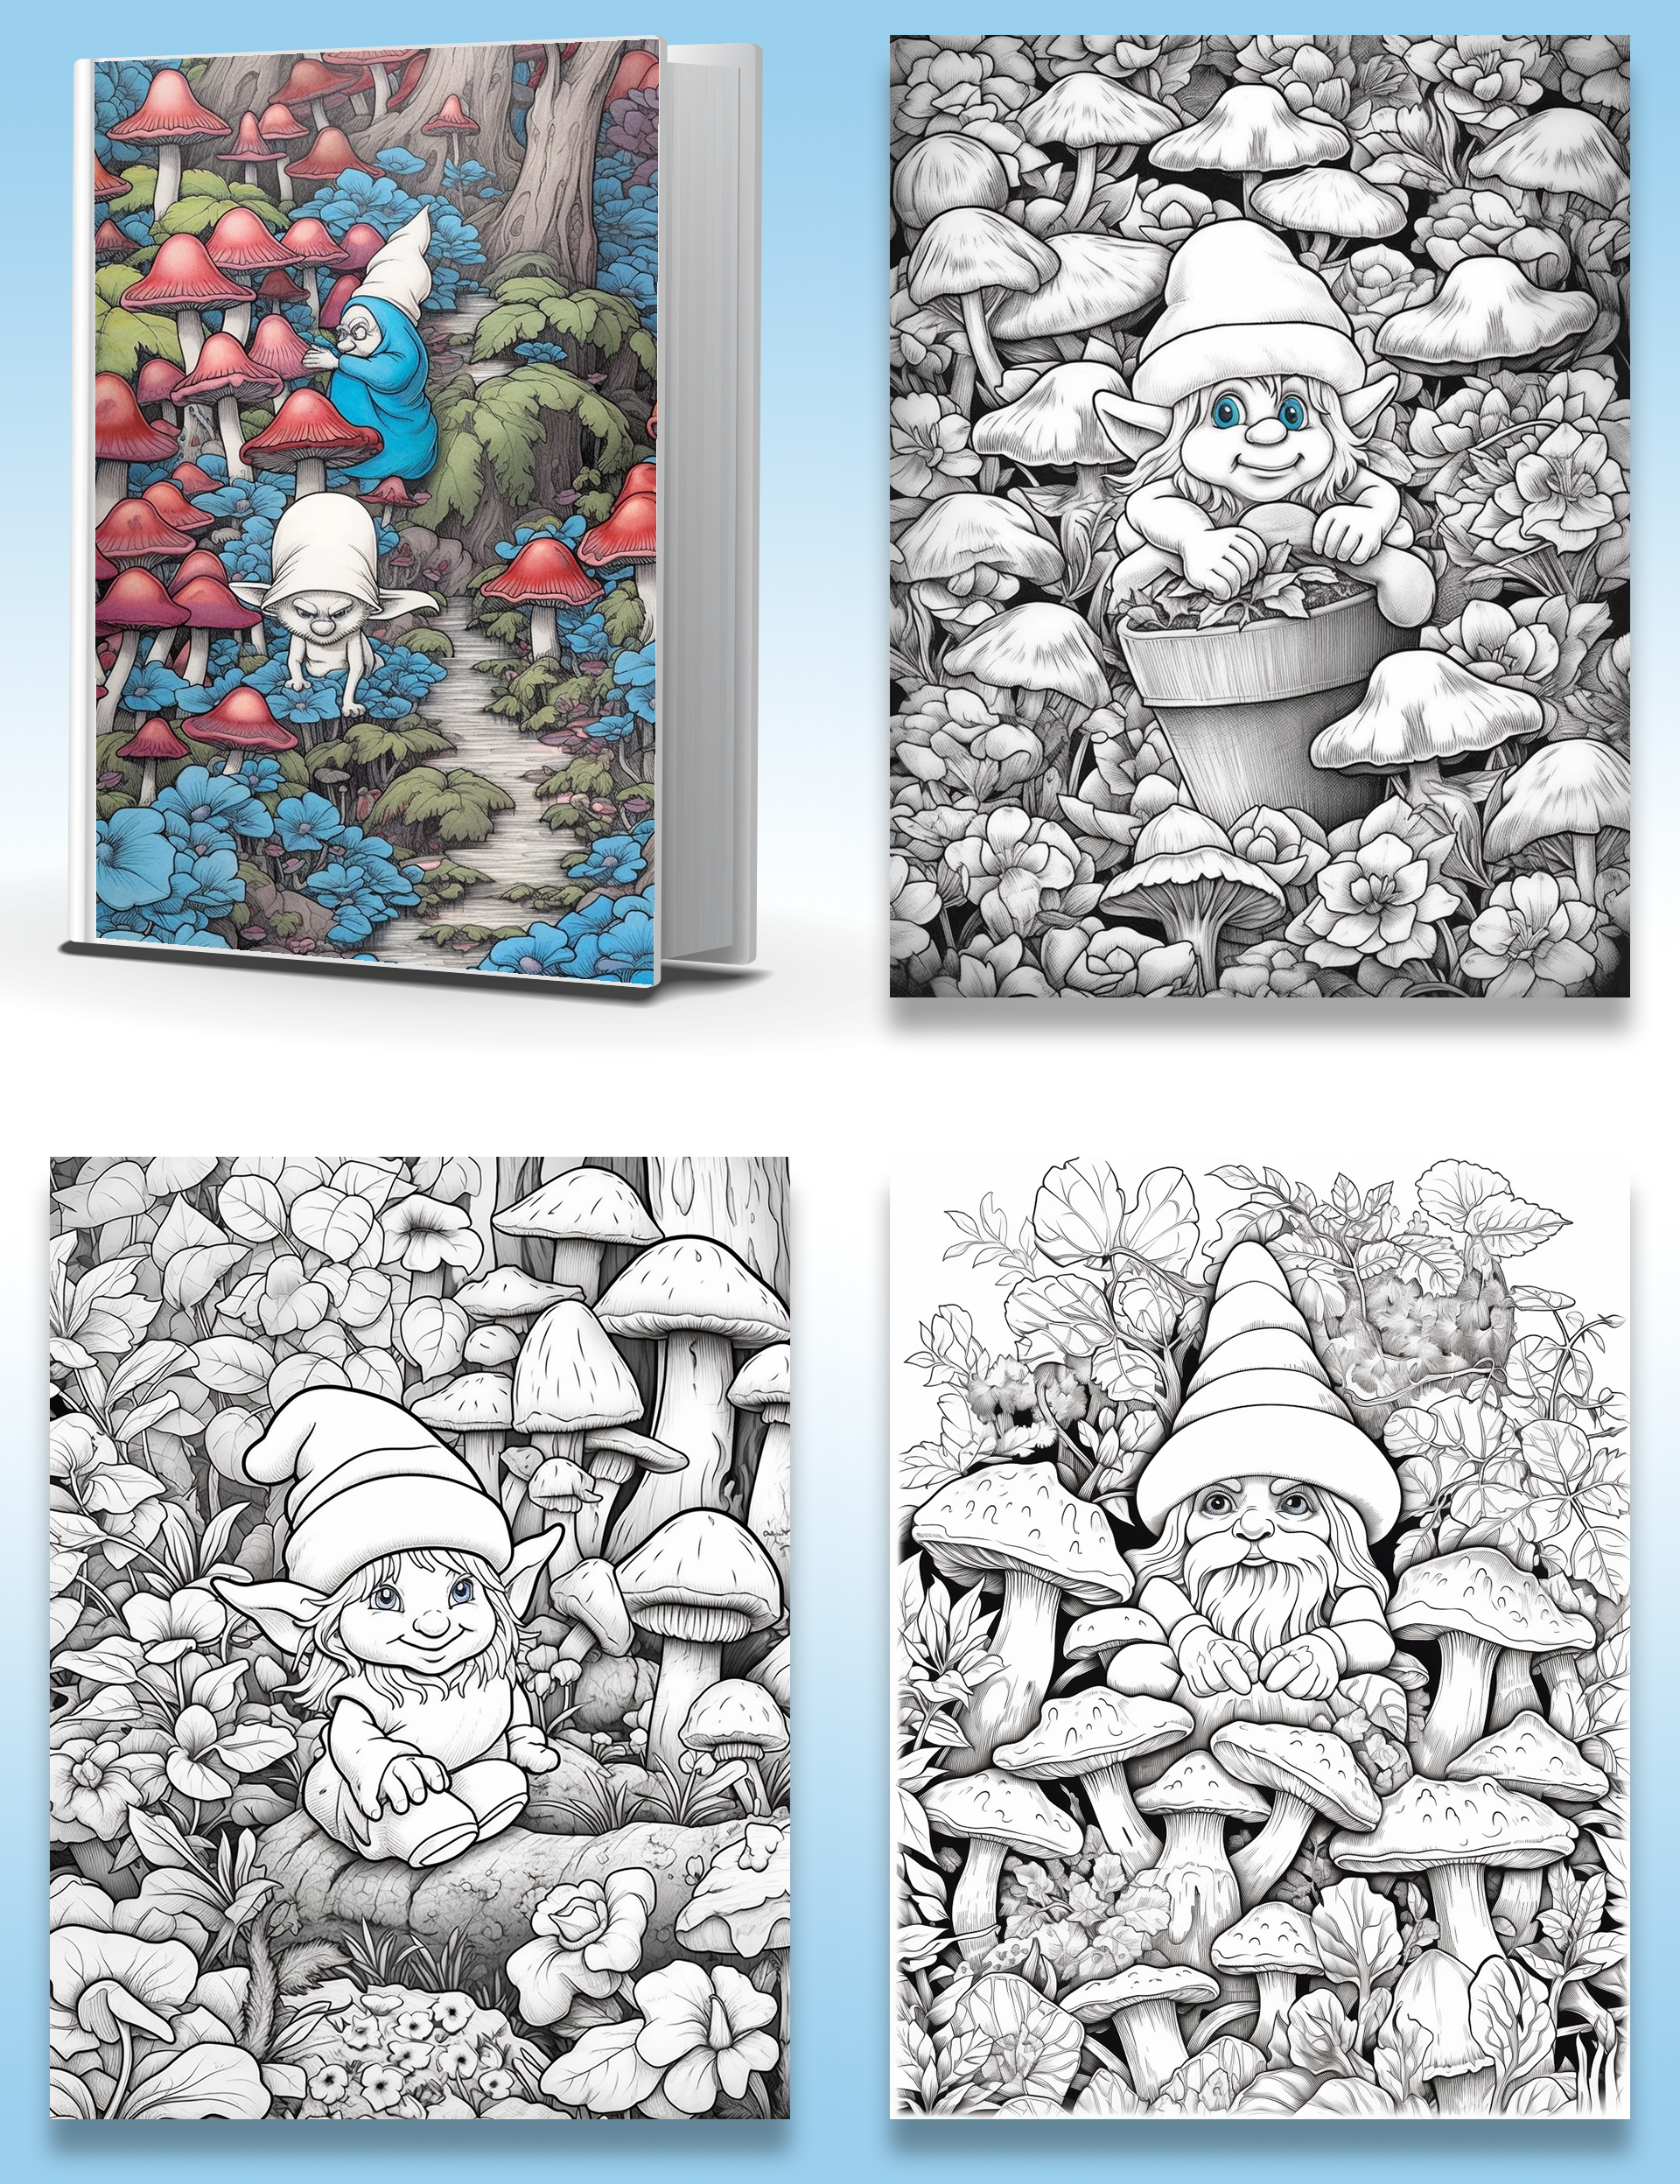 Join Bluemo on an Exciting Colorful Adventure as You Seek and Color Him in a Whimsical World ,Where's Bluemo!